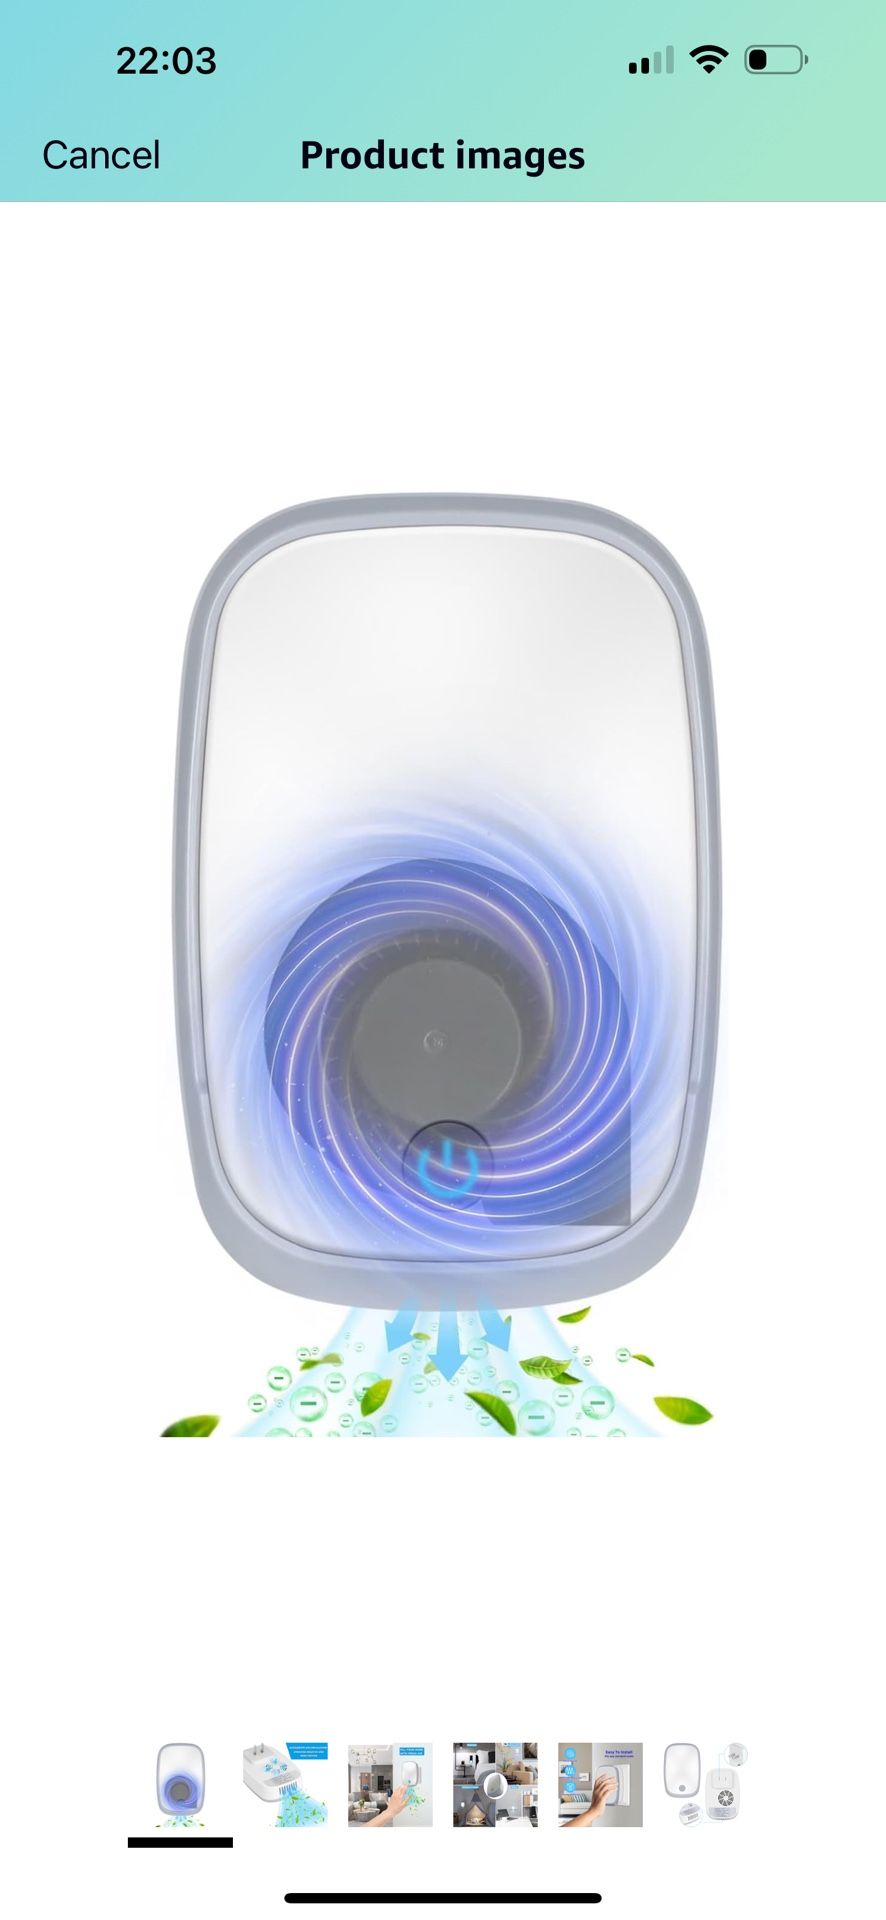 Brand New Ionizer Air Purifier, Protable and Quiet Plug-in Ionizer with Clear Negative Ion Wind Output, for Home and Office Use.